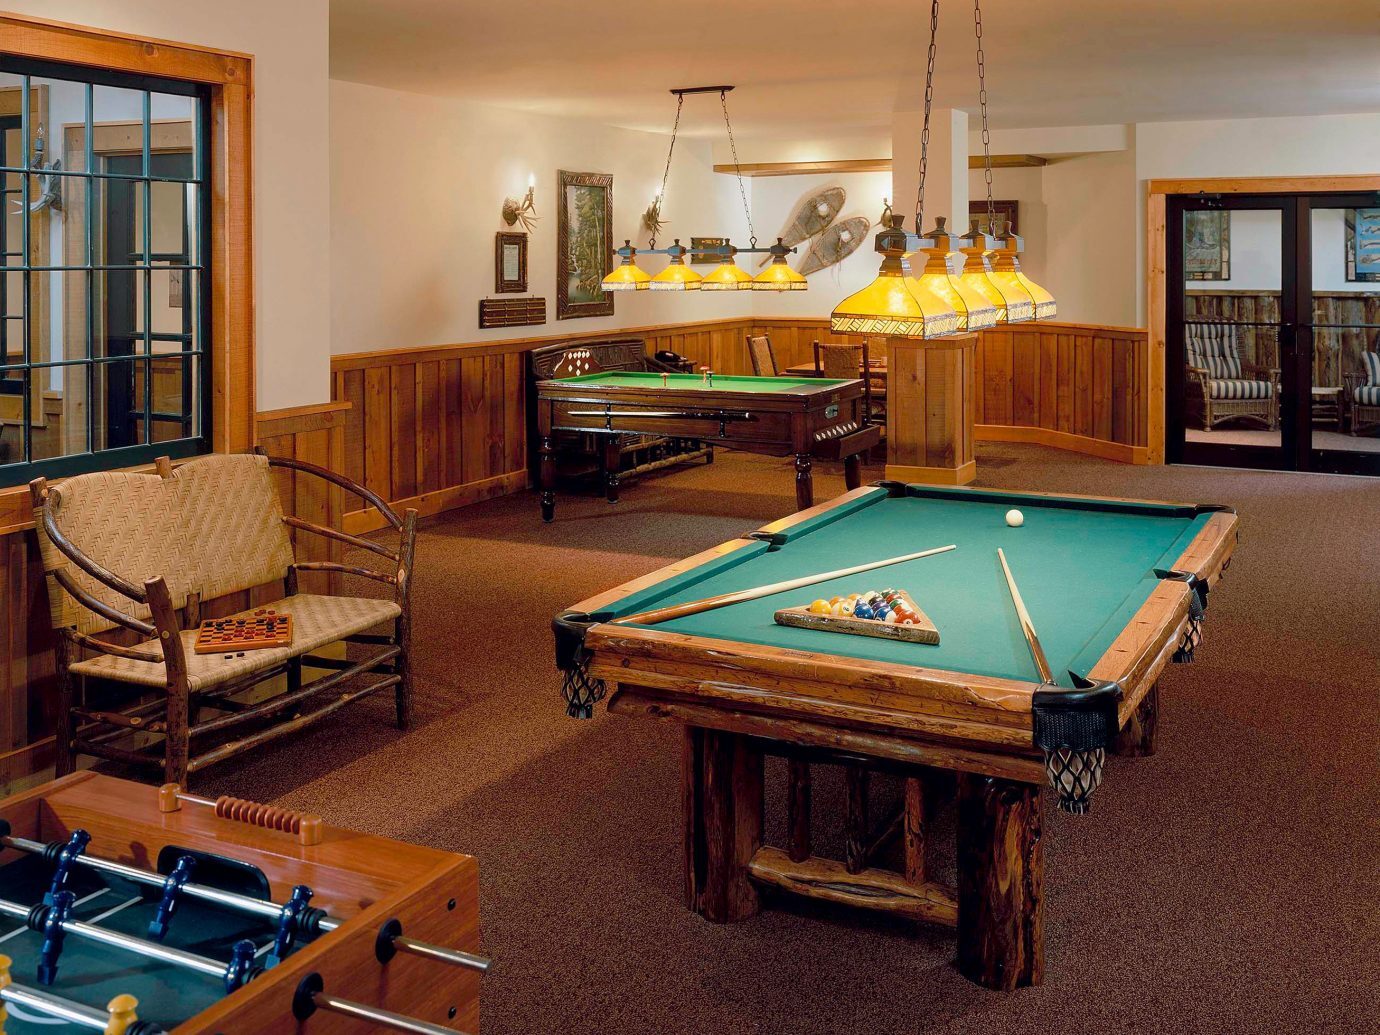 Billard room at The Whiteface Lodge